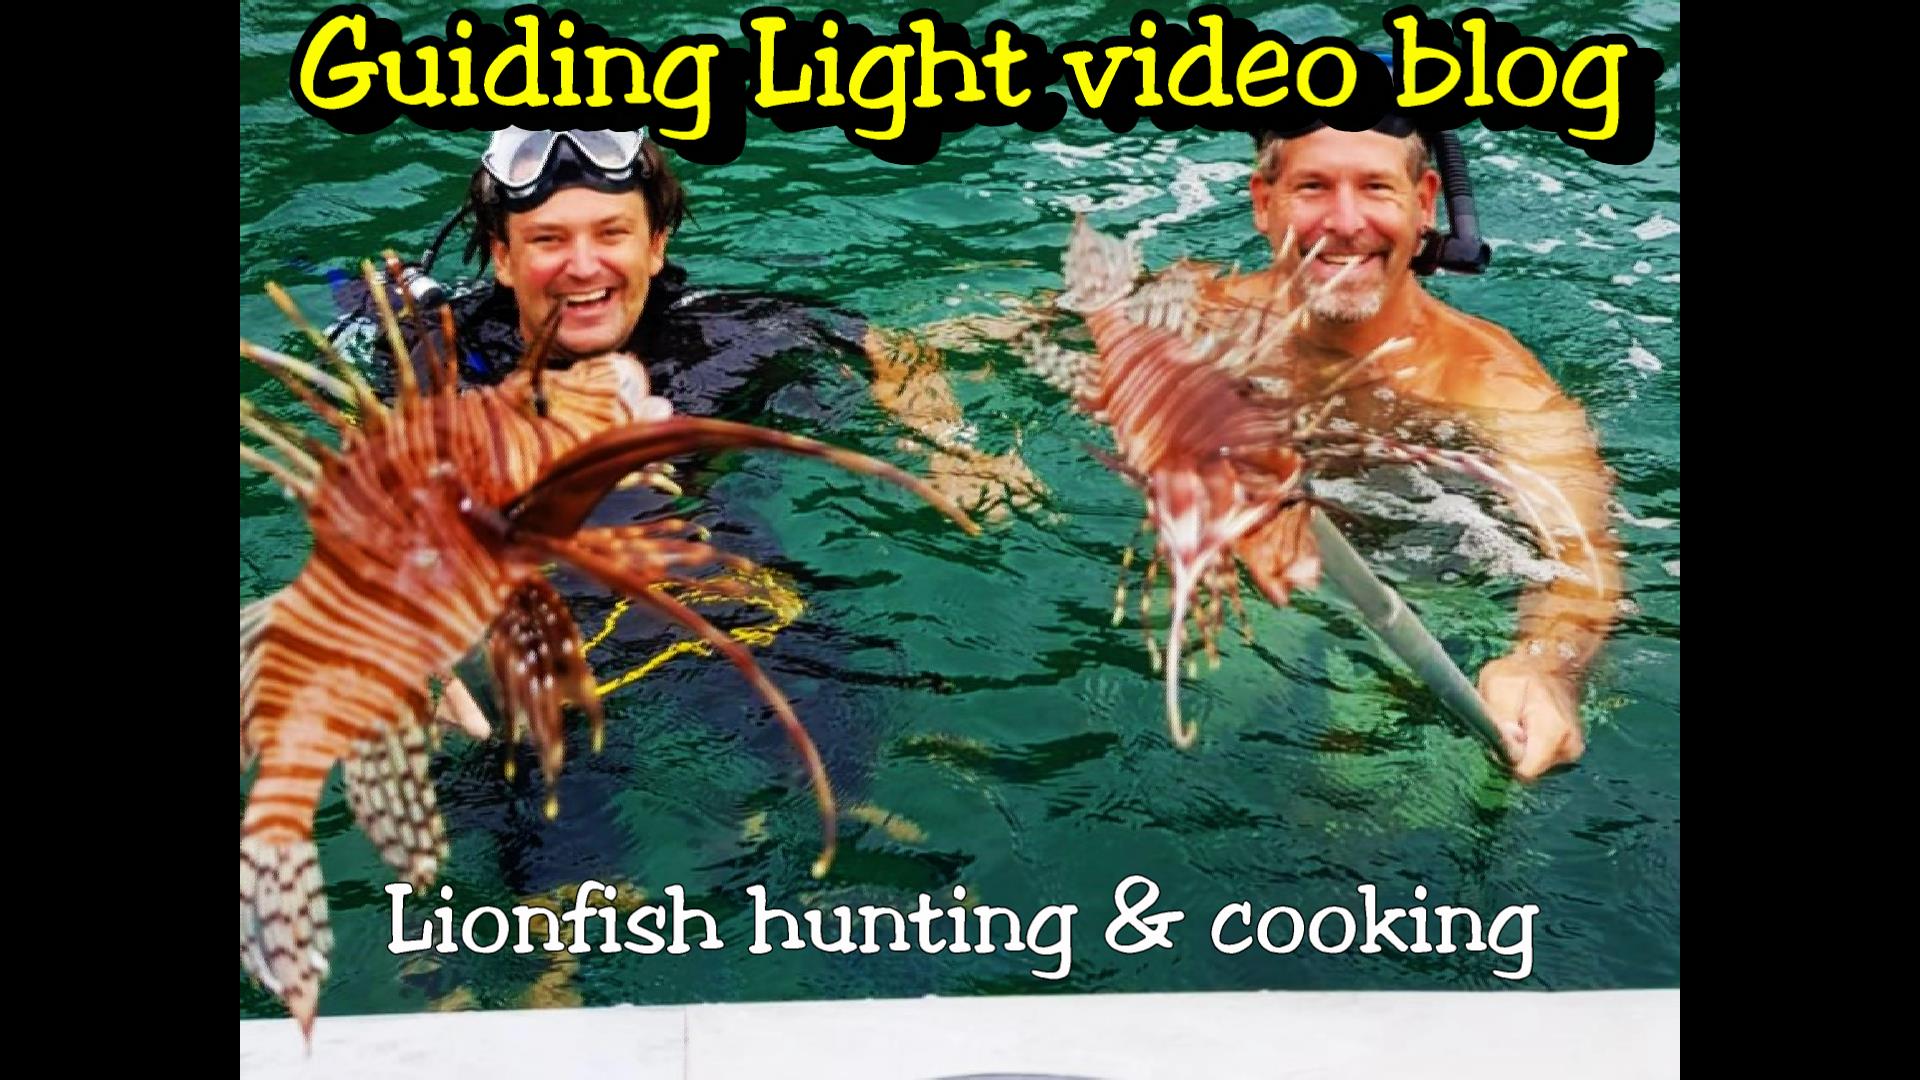 My 3rd lionfish video shows you three different recipes